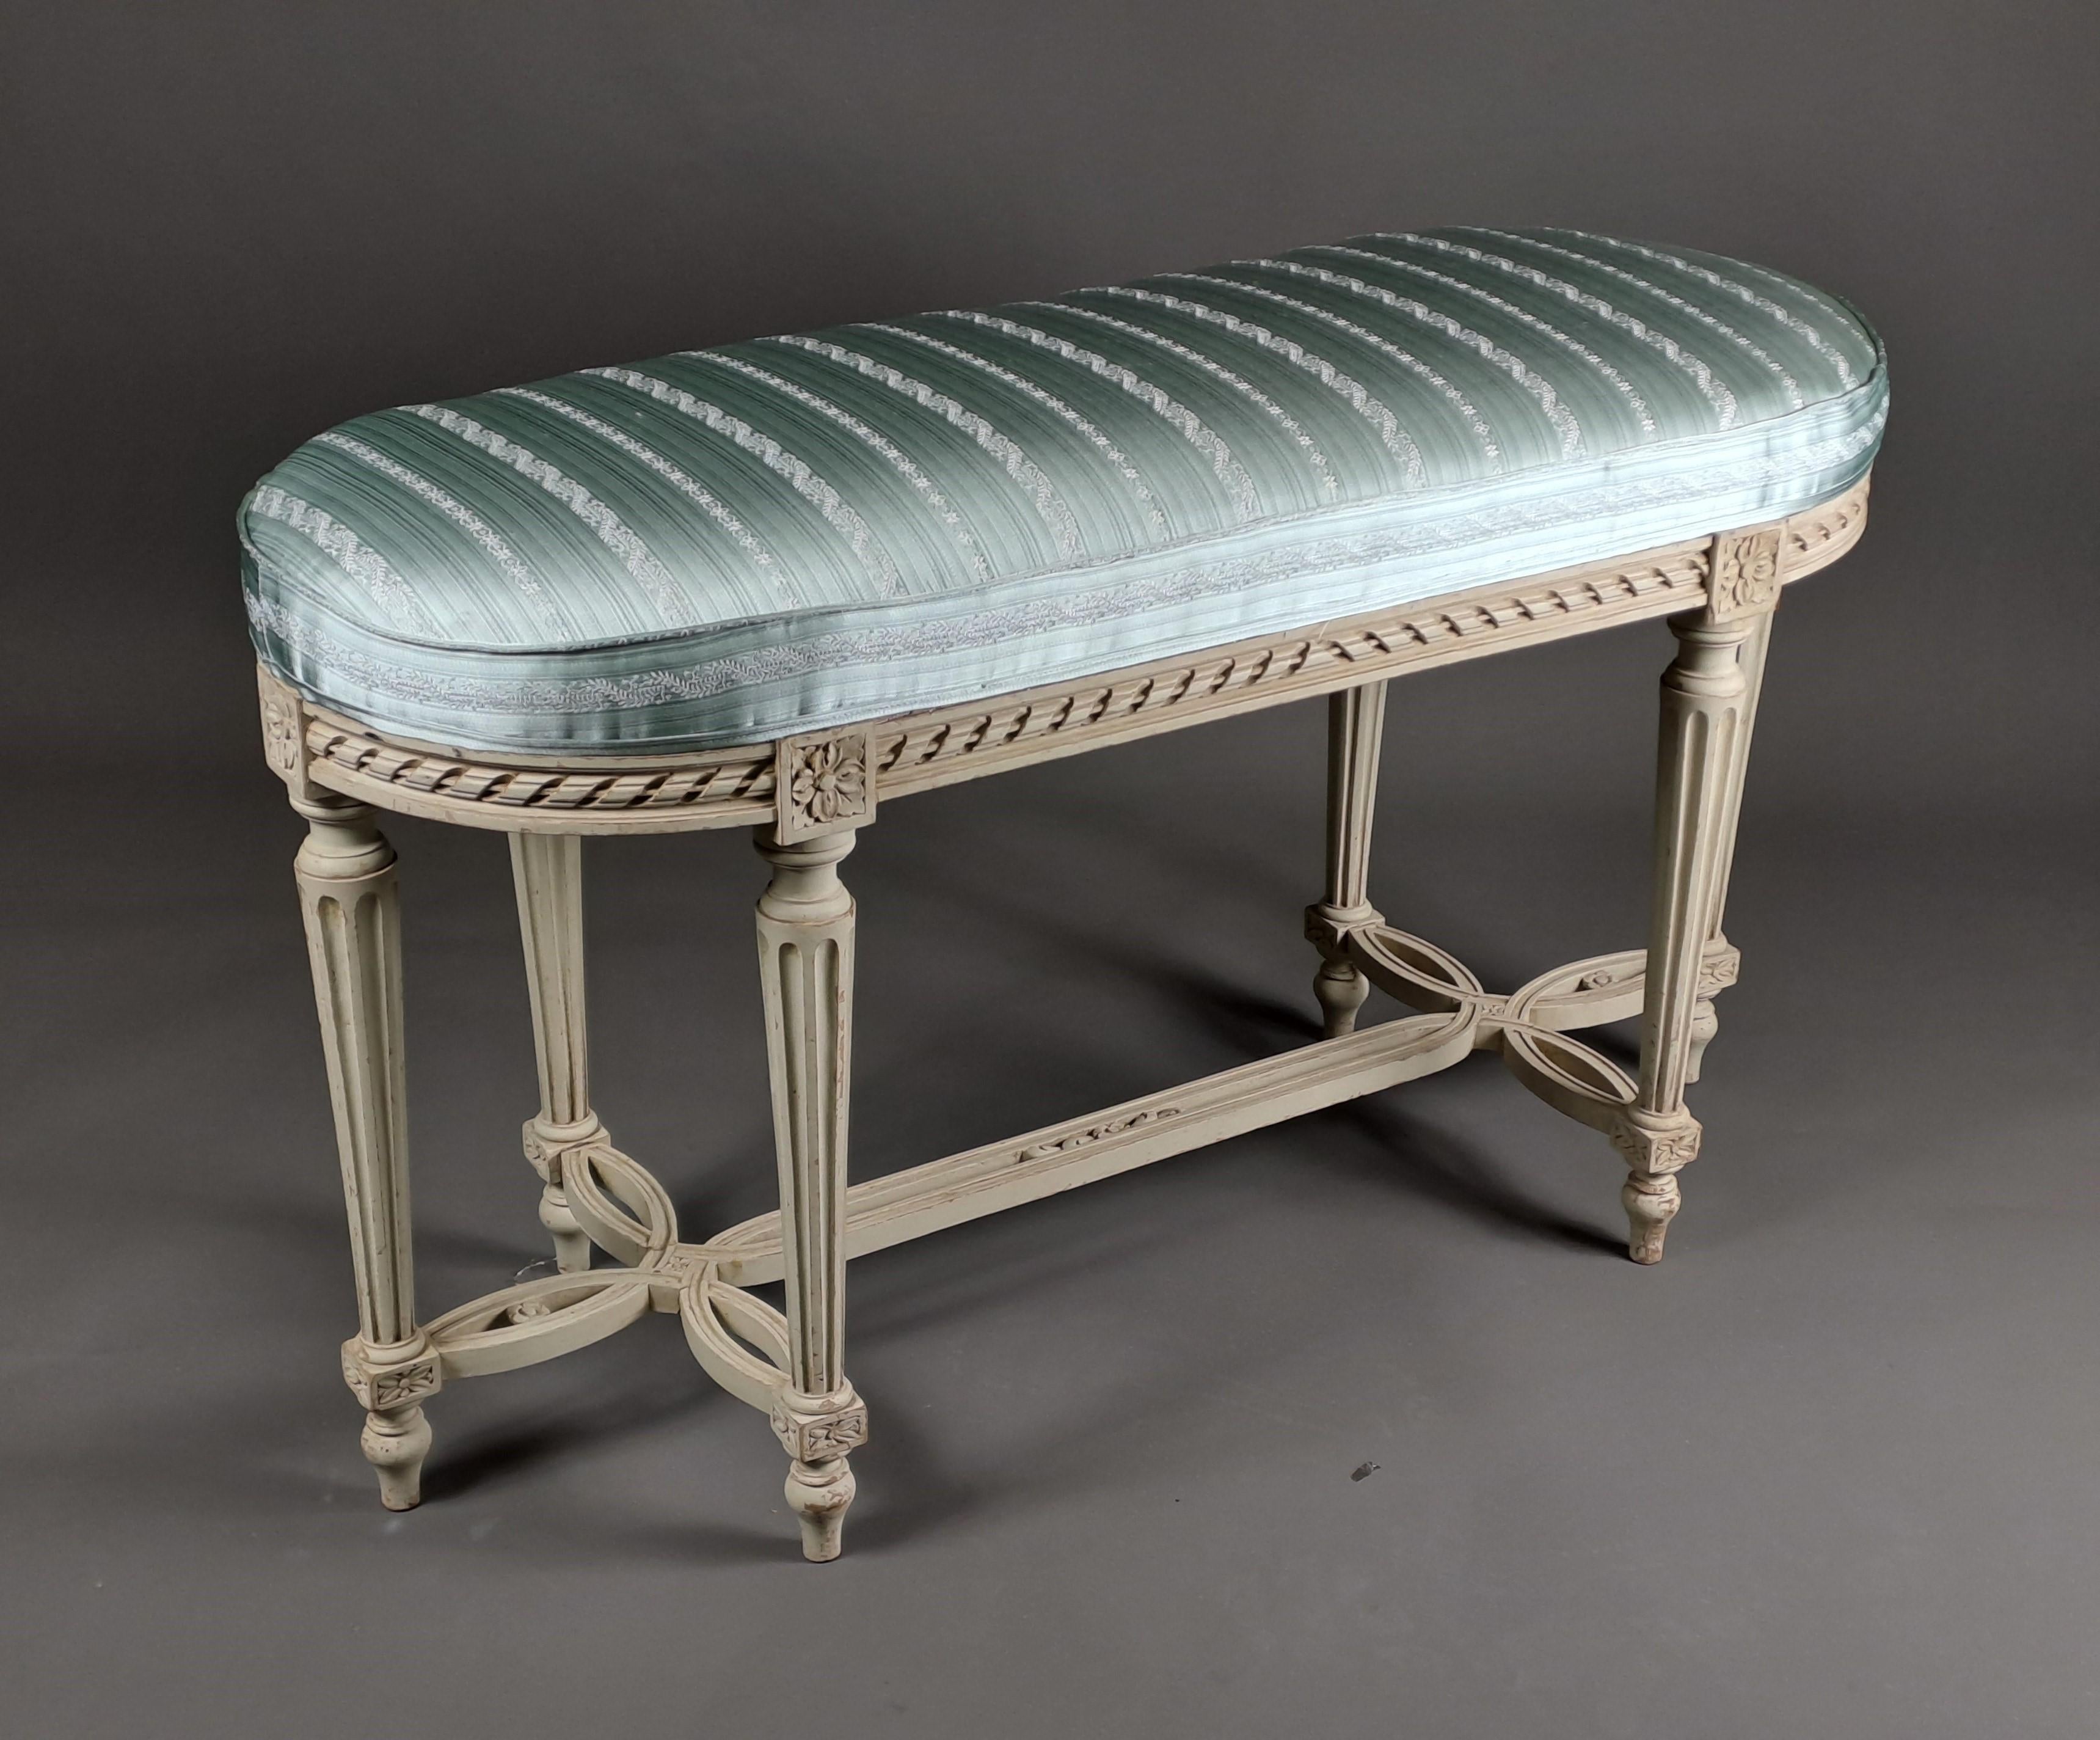 Elegant two-seater bench in light gray lacquered wood, richly carved with neoclassical-inspired motifs.
Six sheathed fluted legs joined by a superb spacer with a sinuous path.

Covered with a very good quality embroidered silk brocade (new, changed